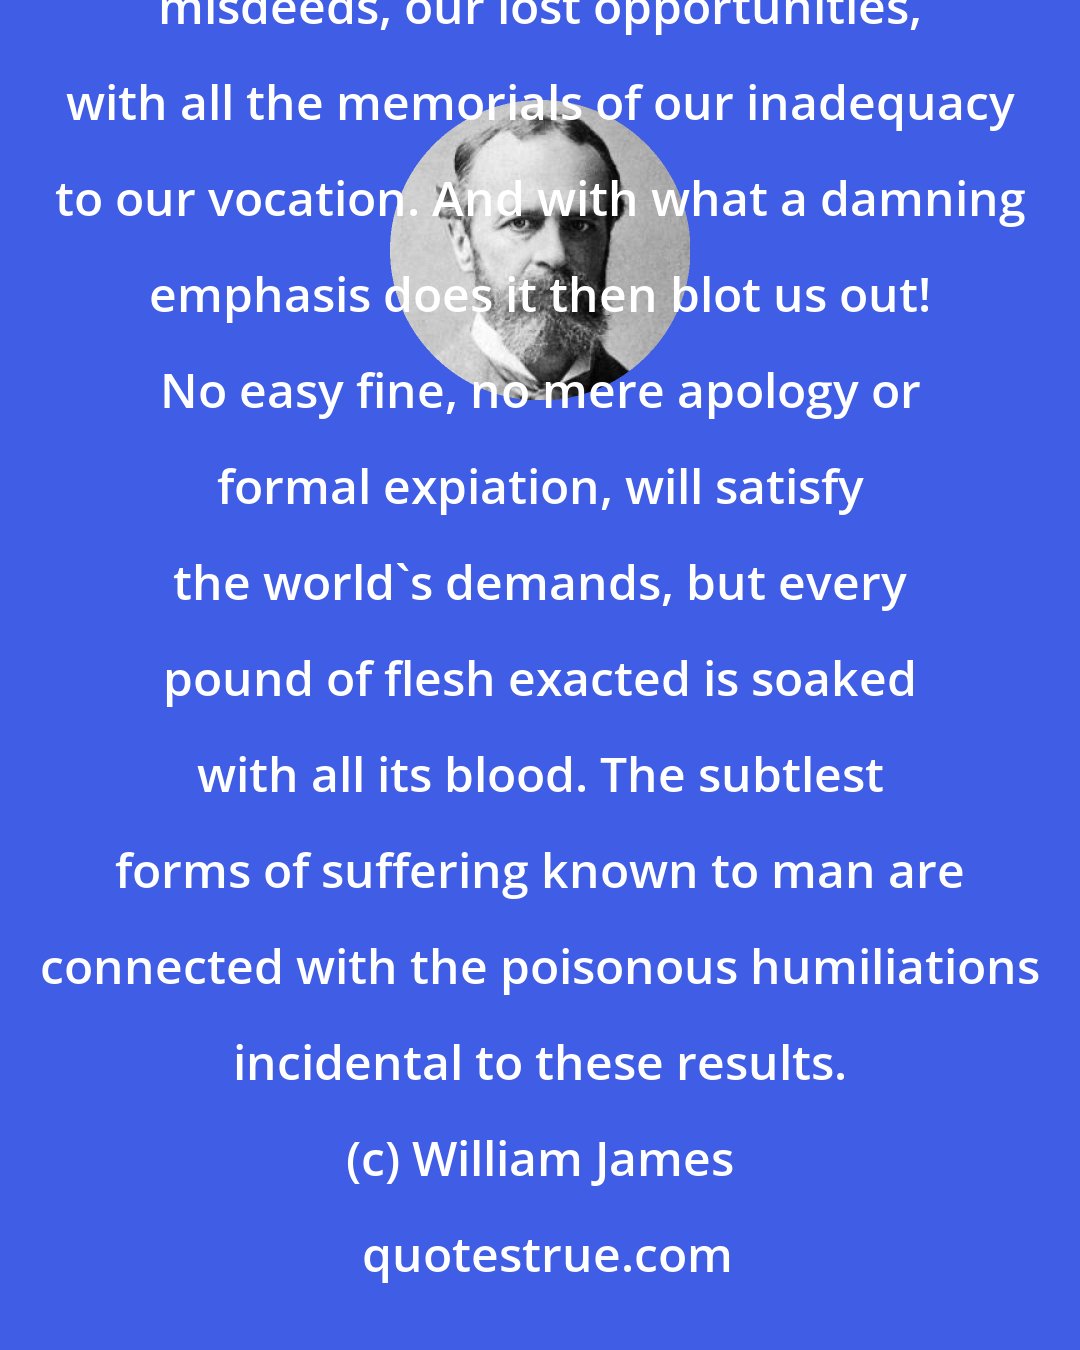 William James: Failure, then, failure! so the world stamps us at every turn. We strew it with our blunders, our misdeeds, our lost opportunities, with all the memorials of our inadequacy to our vocation. And with what a damning emphasis does it then blot us out! No easy fine, no mere apology or formal expiation, will satisfy the world's demands, but every pound of flesh exacted is soaked with all its blood. The subtlest forms of suffering known to man are connected with the poisonous humiliations incidental to these results.